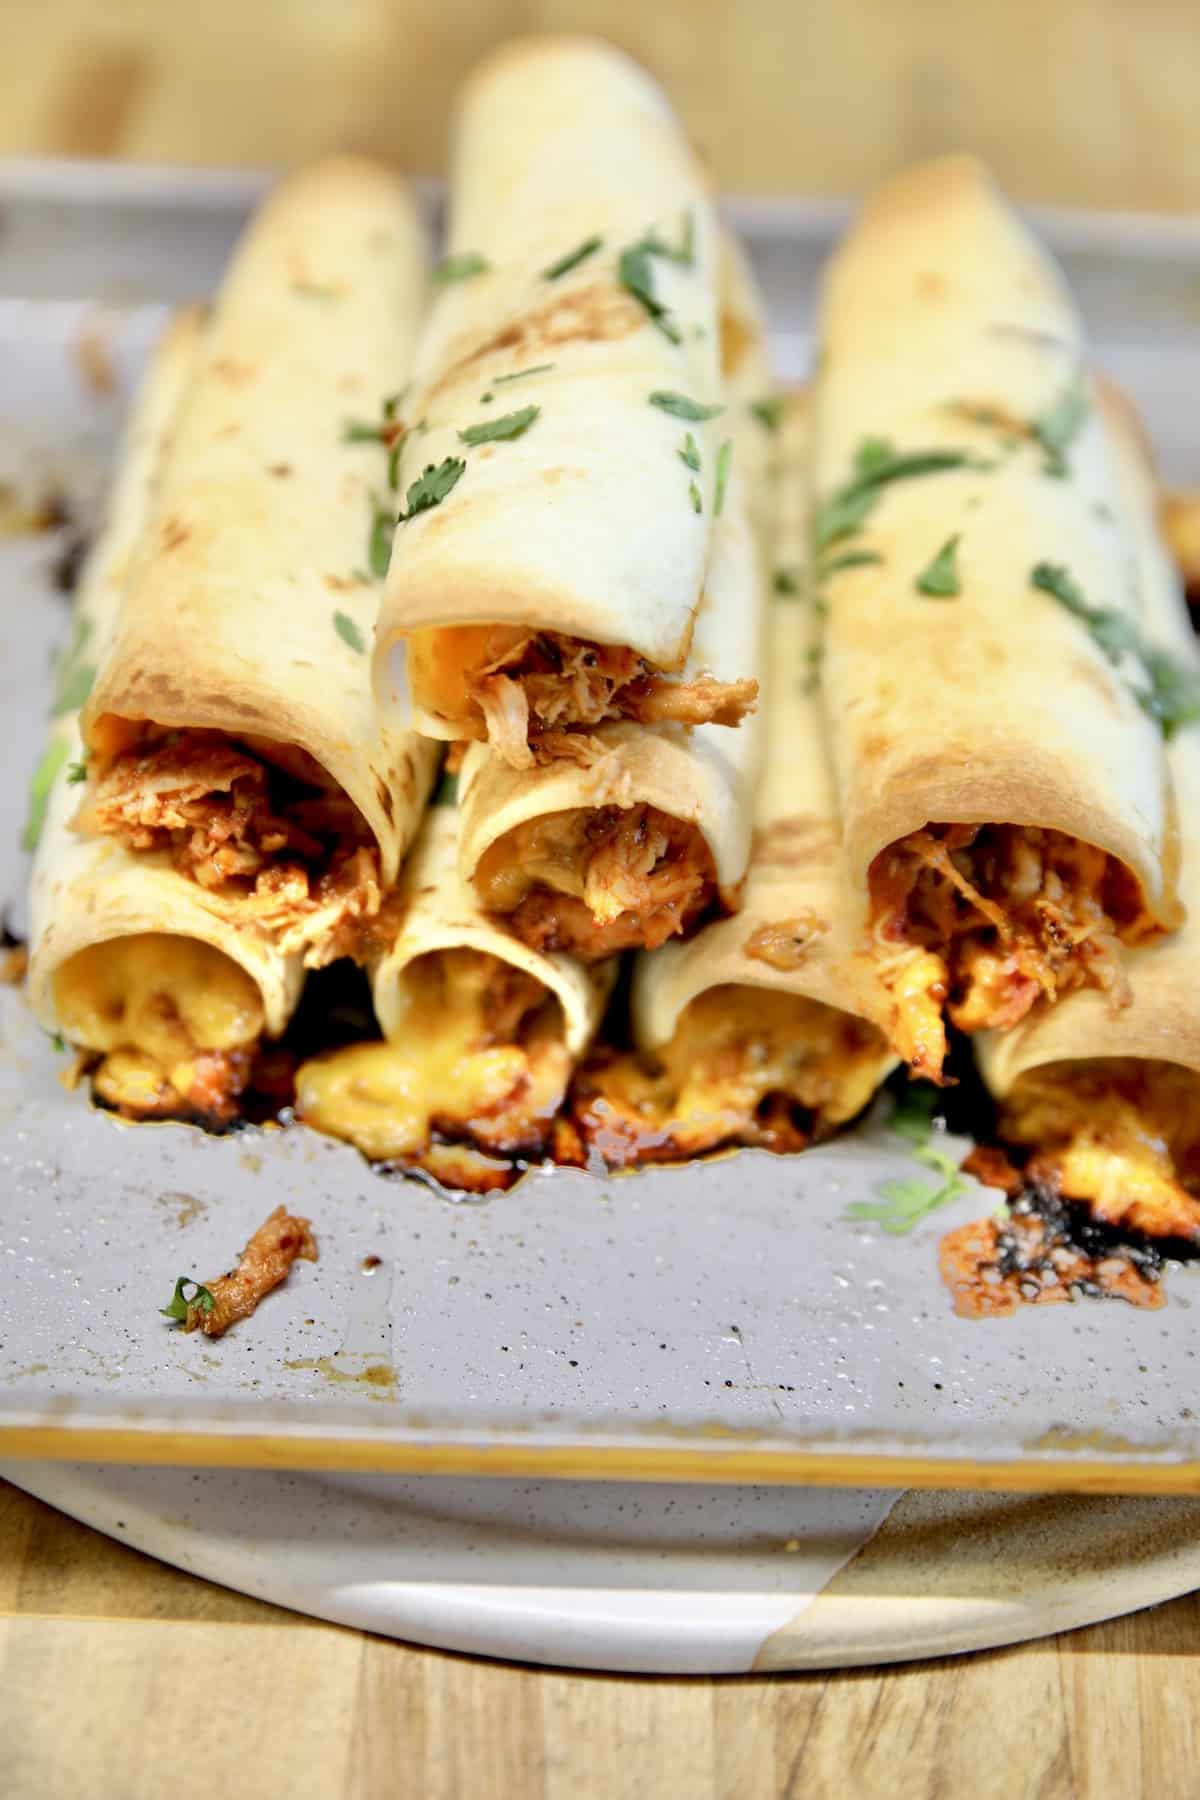 Taquitos with bbq chicken filling.